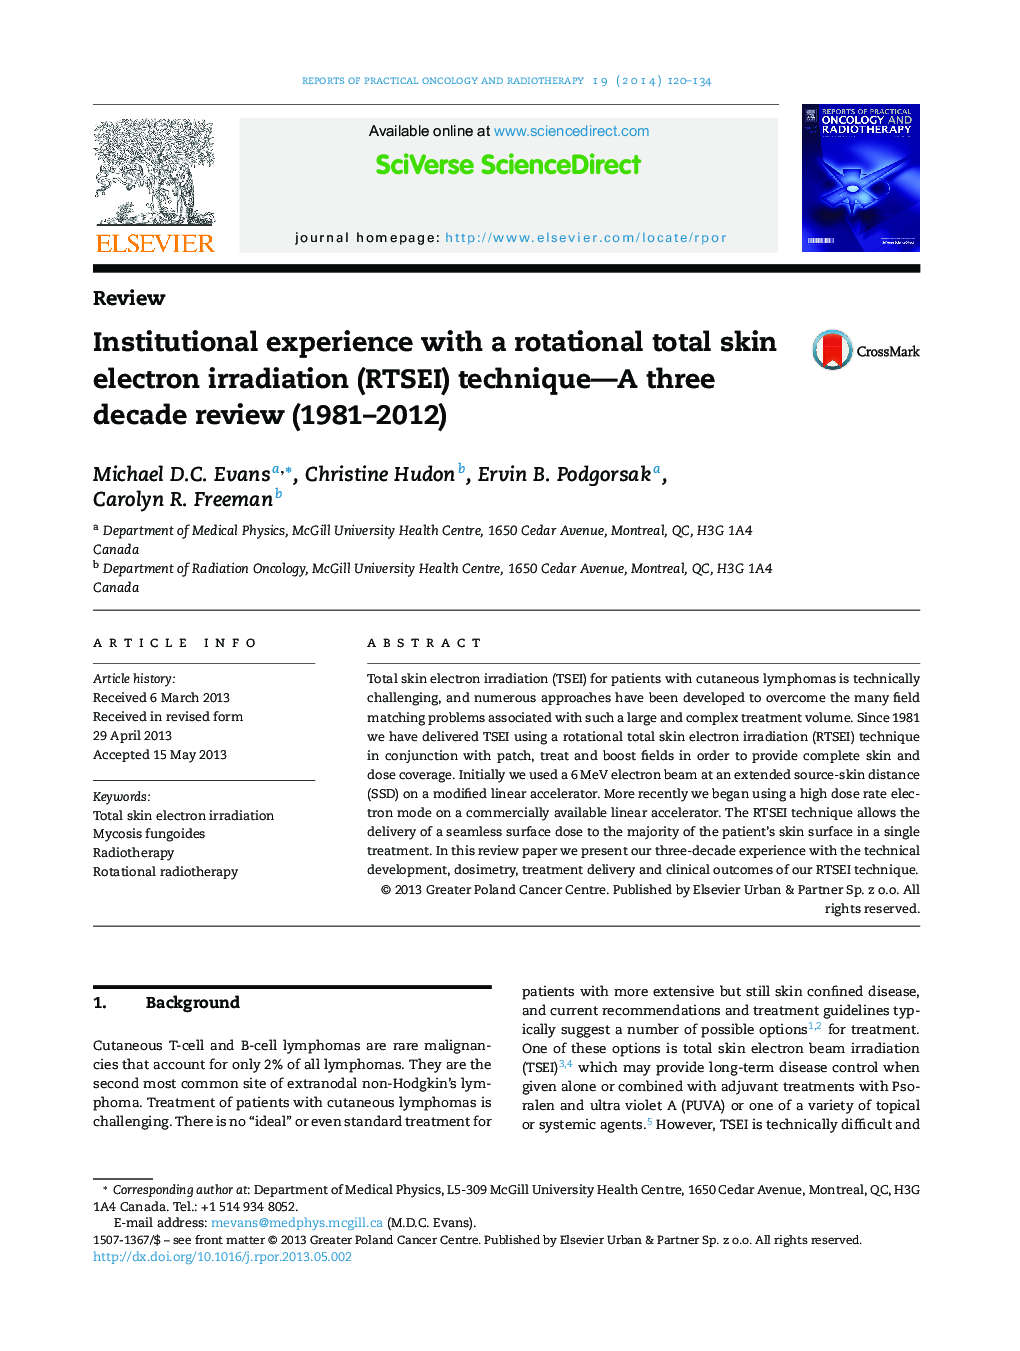 Institutional experience with a rotational total skin electron irradiation (RTSEI) technique-A three decade review (1981-2012)